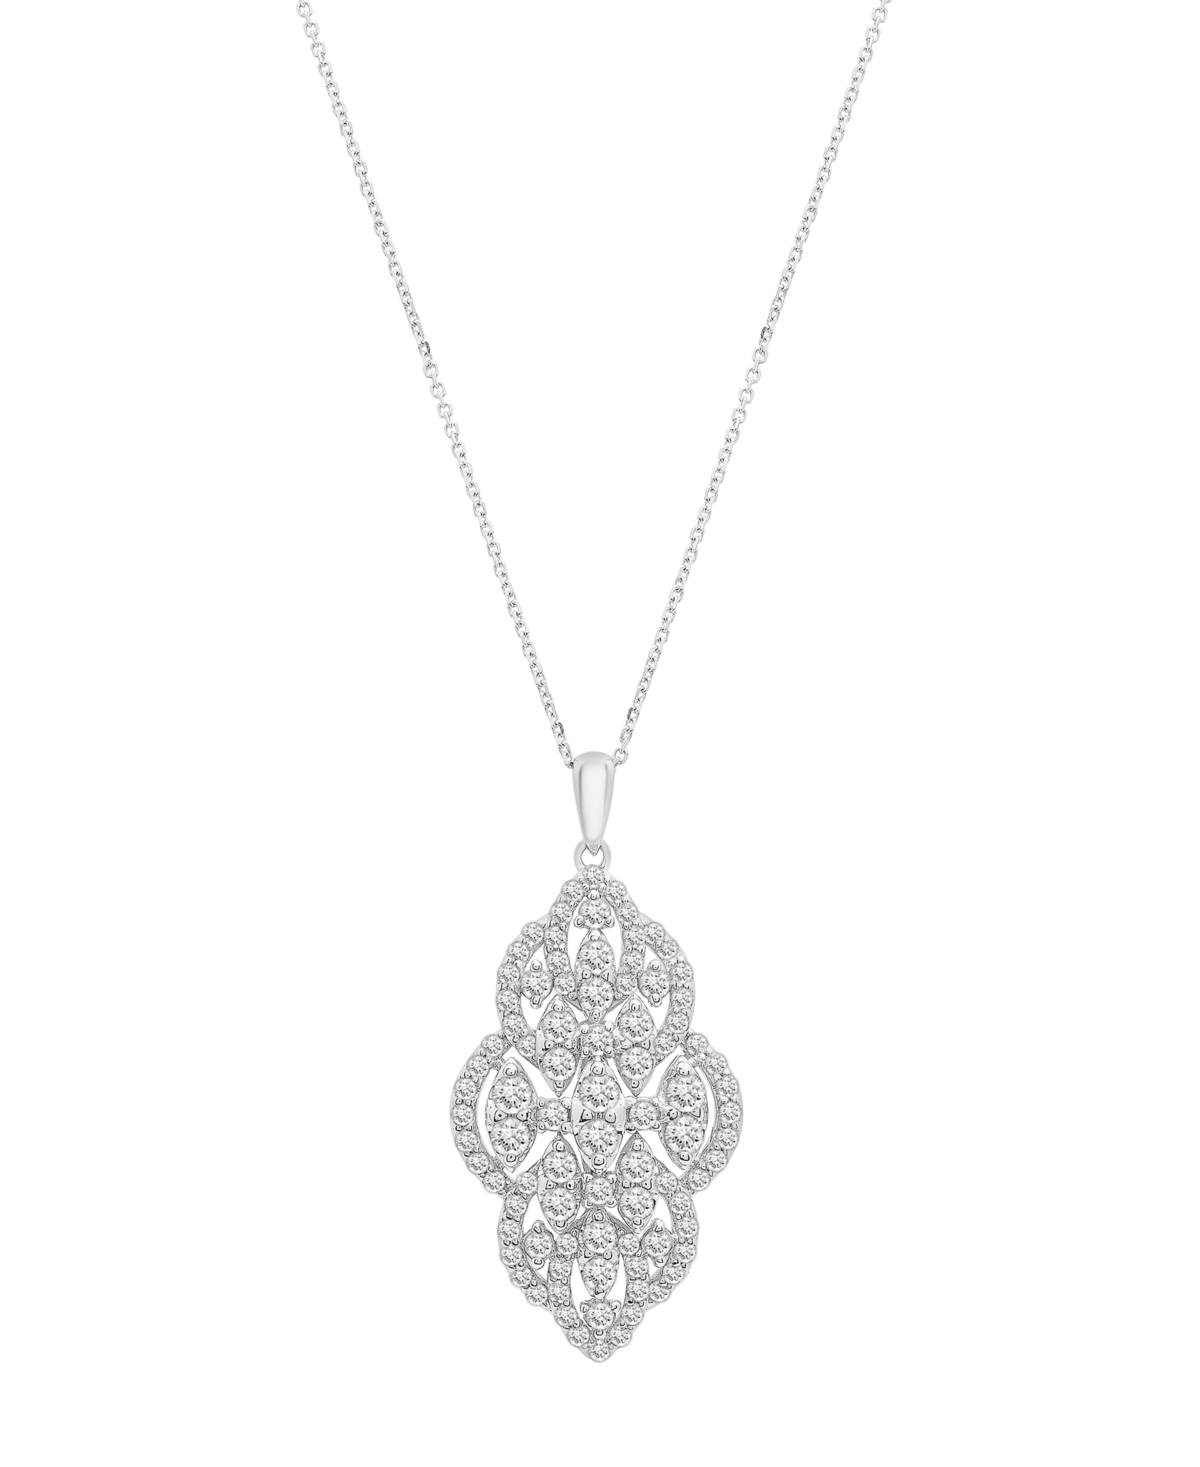 Diamond Filigree Cluster 18" Pendant Necklace (1-1/2 ct. t.w.) in 14k White Gold or 14k Yellow Gold, Created for Macy's - Yellow Gold